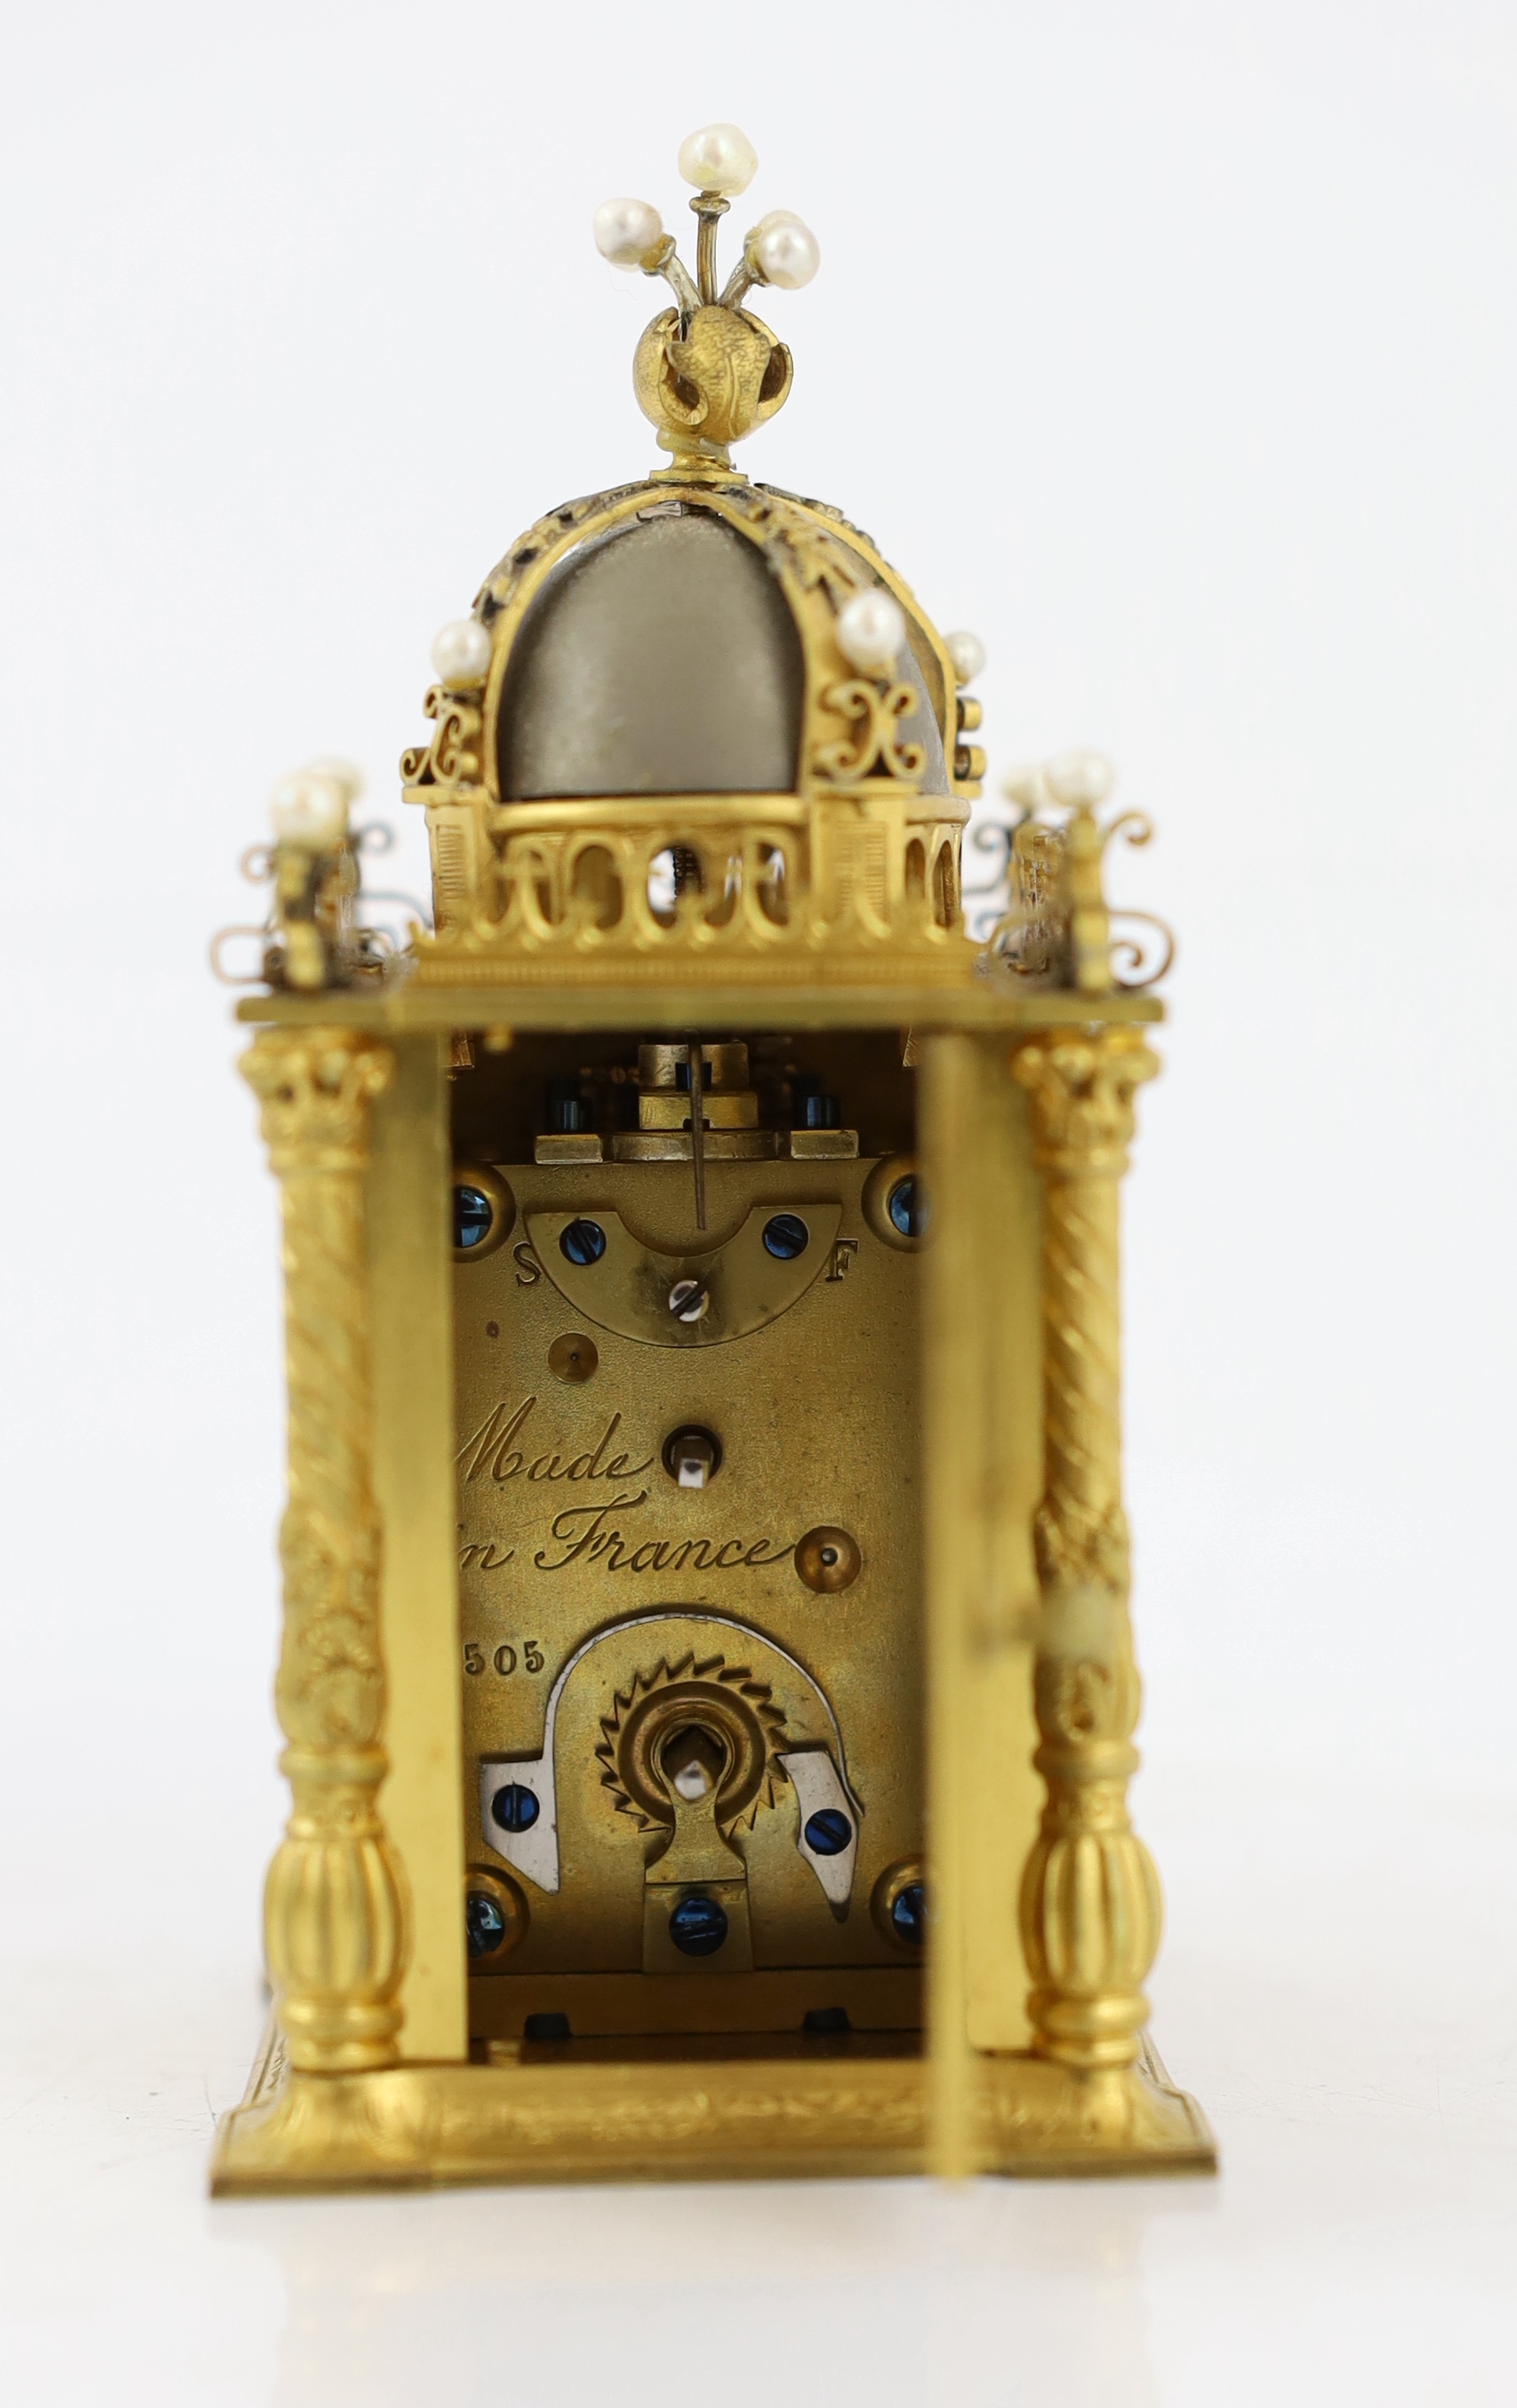 An early 20th century French miniature timepiece modelled on a 17th century domed bell clock, the - Image 4 of 6